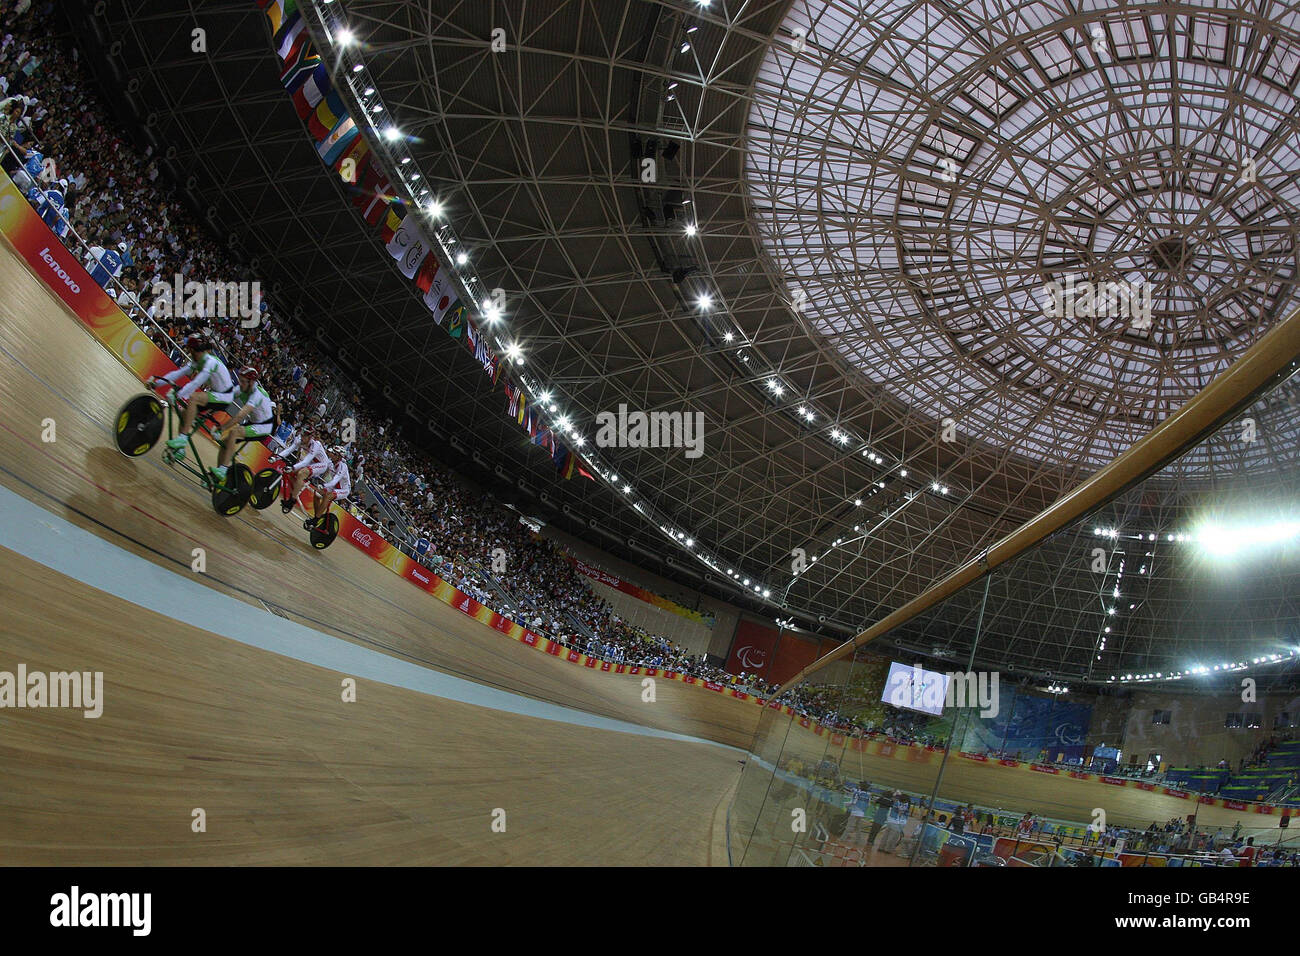 Republic of Ireland's Michale Delaney and David Peelo in the mens sprint B&VI in the Laoshan Velodrome at the Beijing Paralympic Games 2008, China. Stock Photo